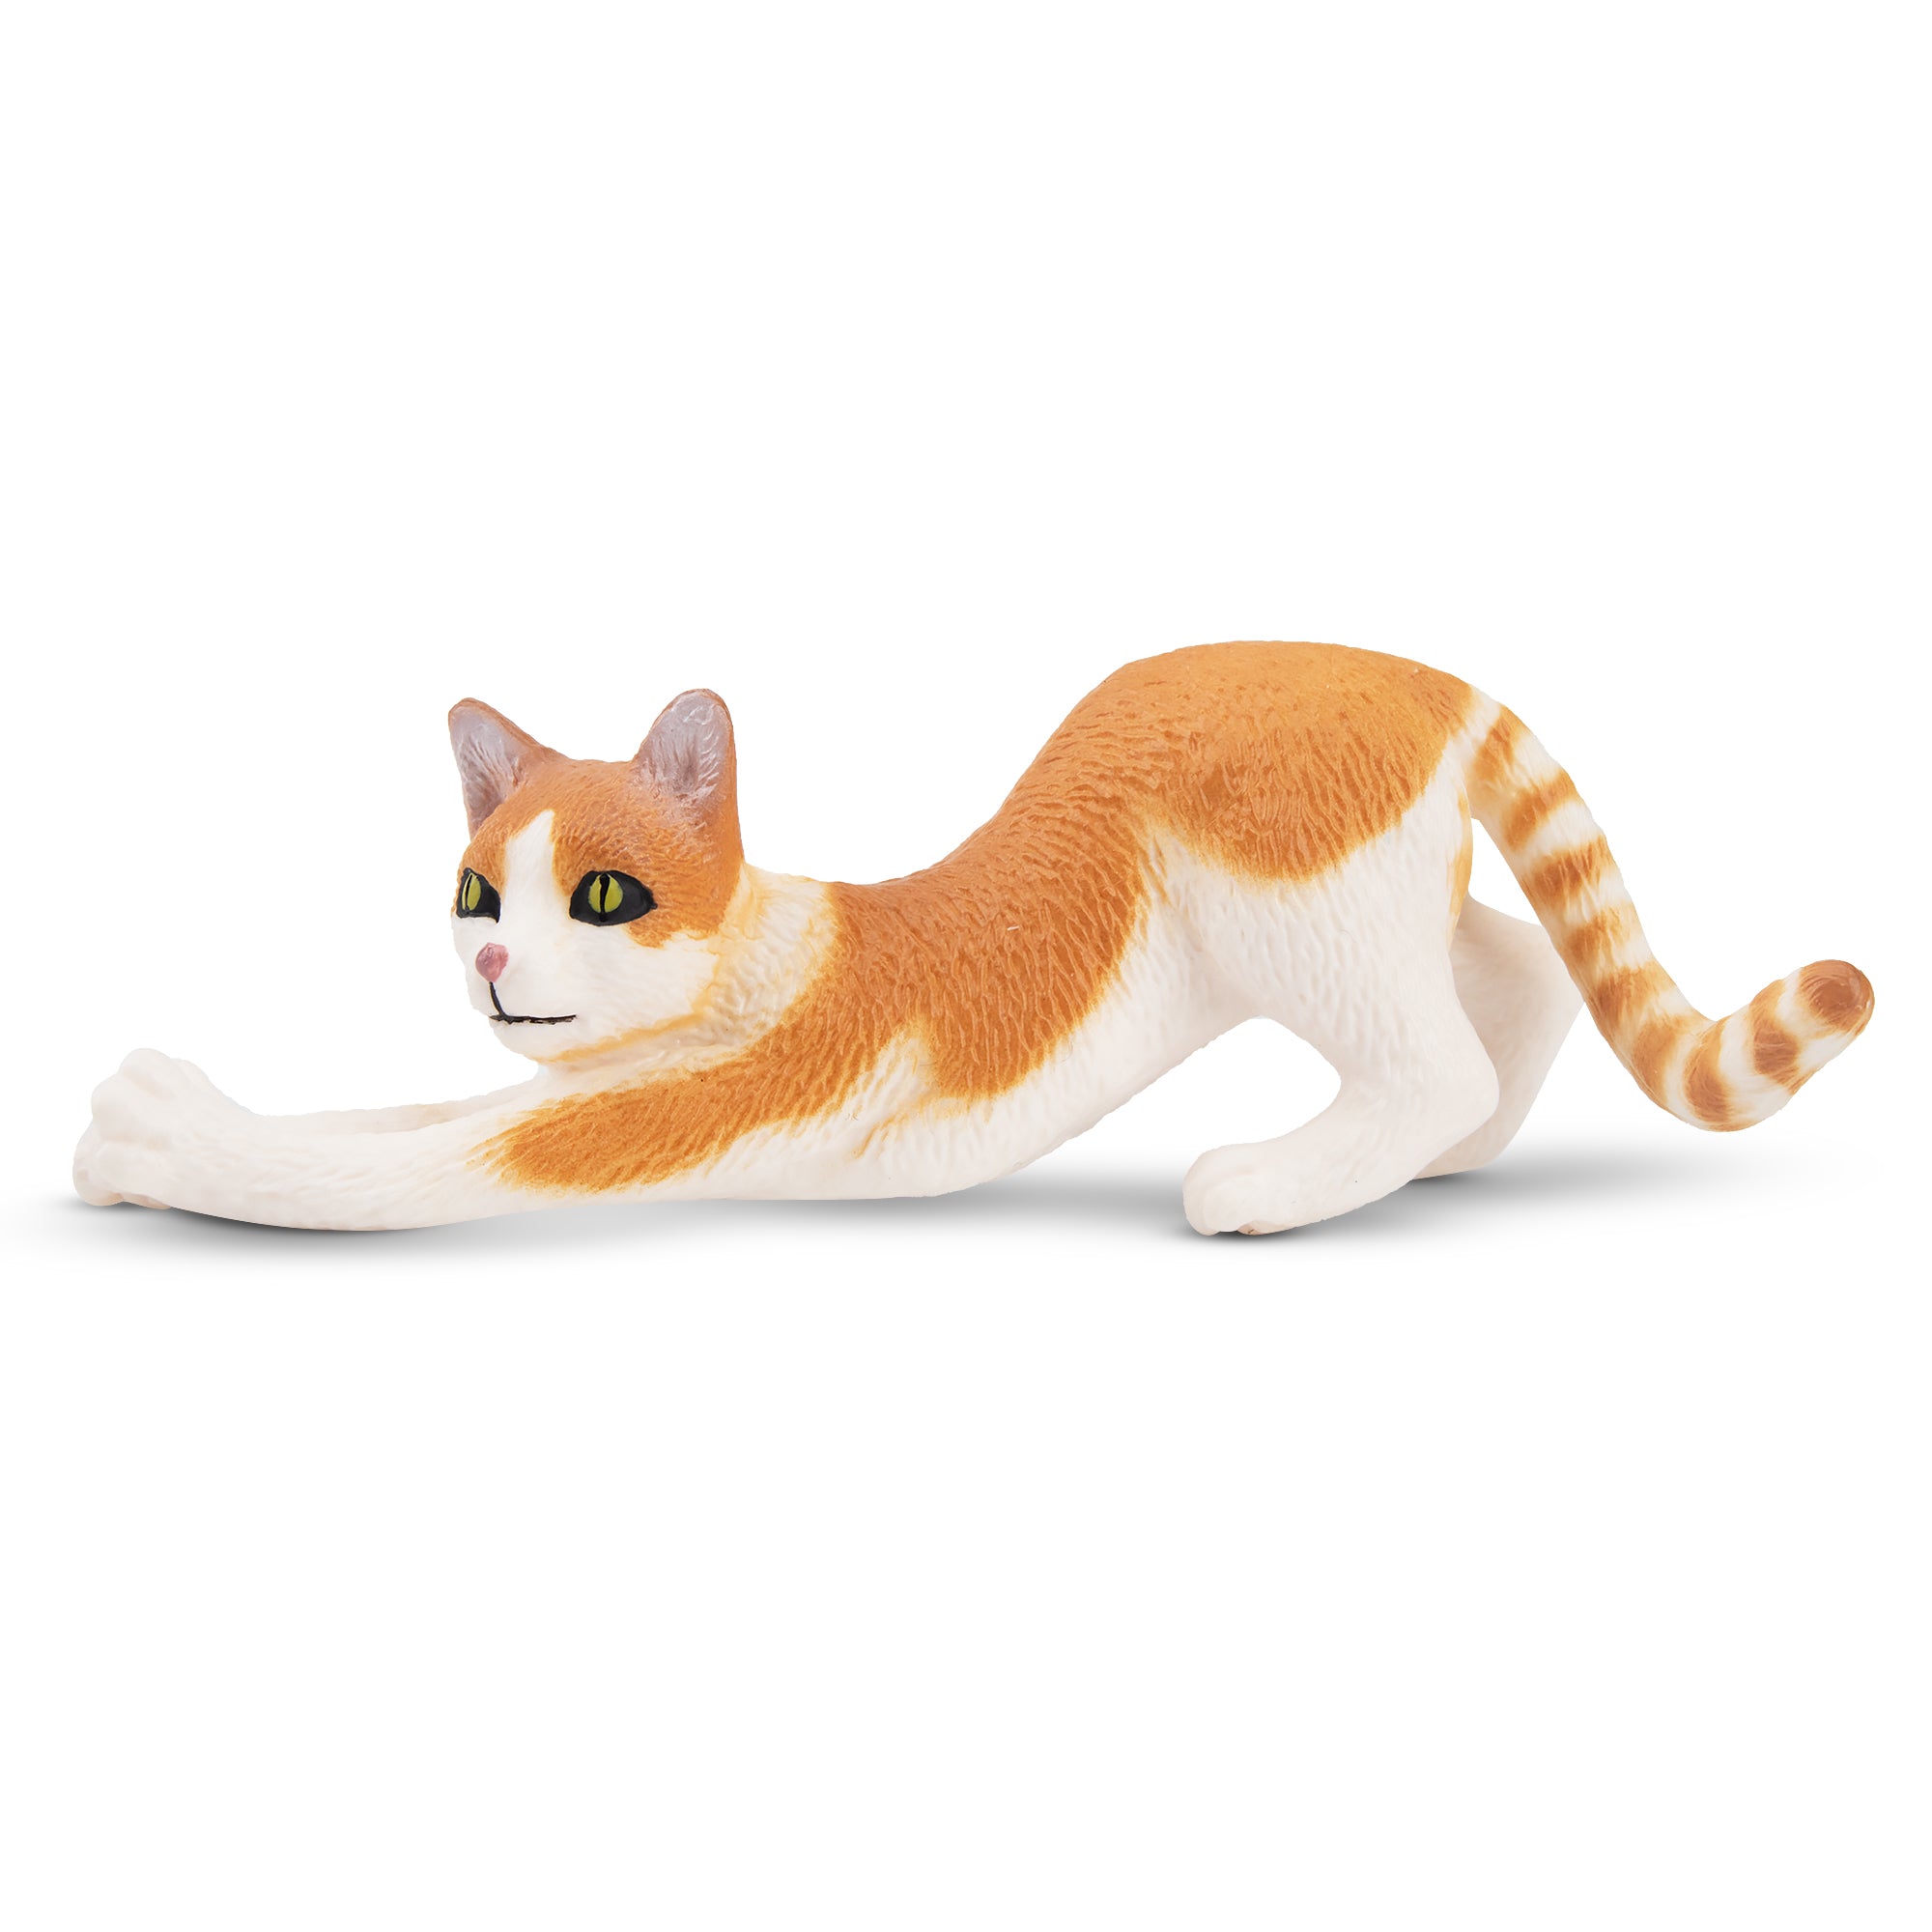 Toymany-Mini-Stretching-Ginger-and-White-Cat-Figurine-Toy